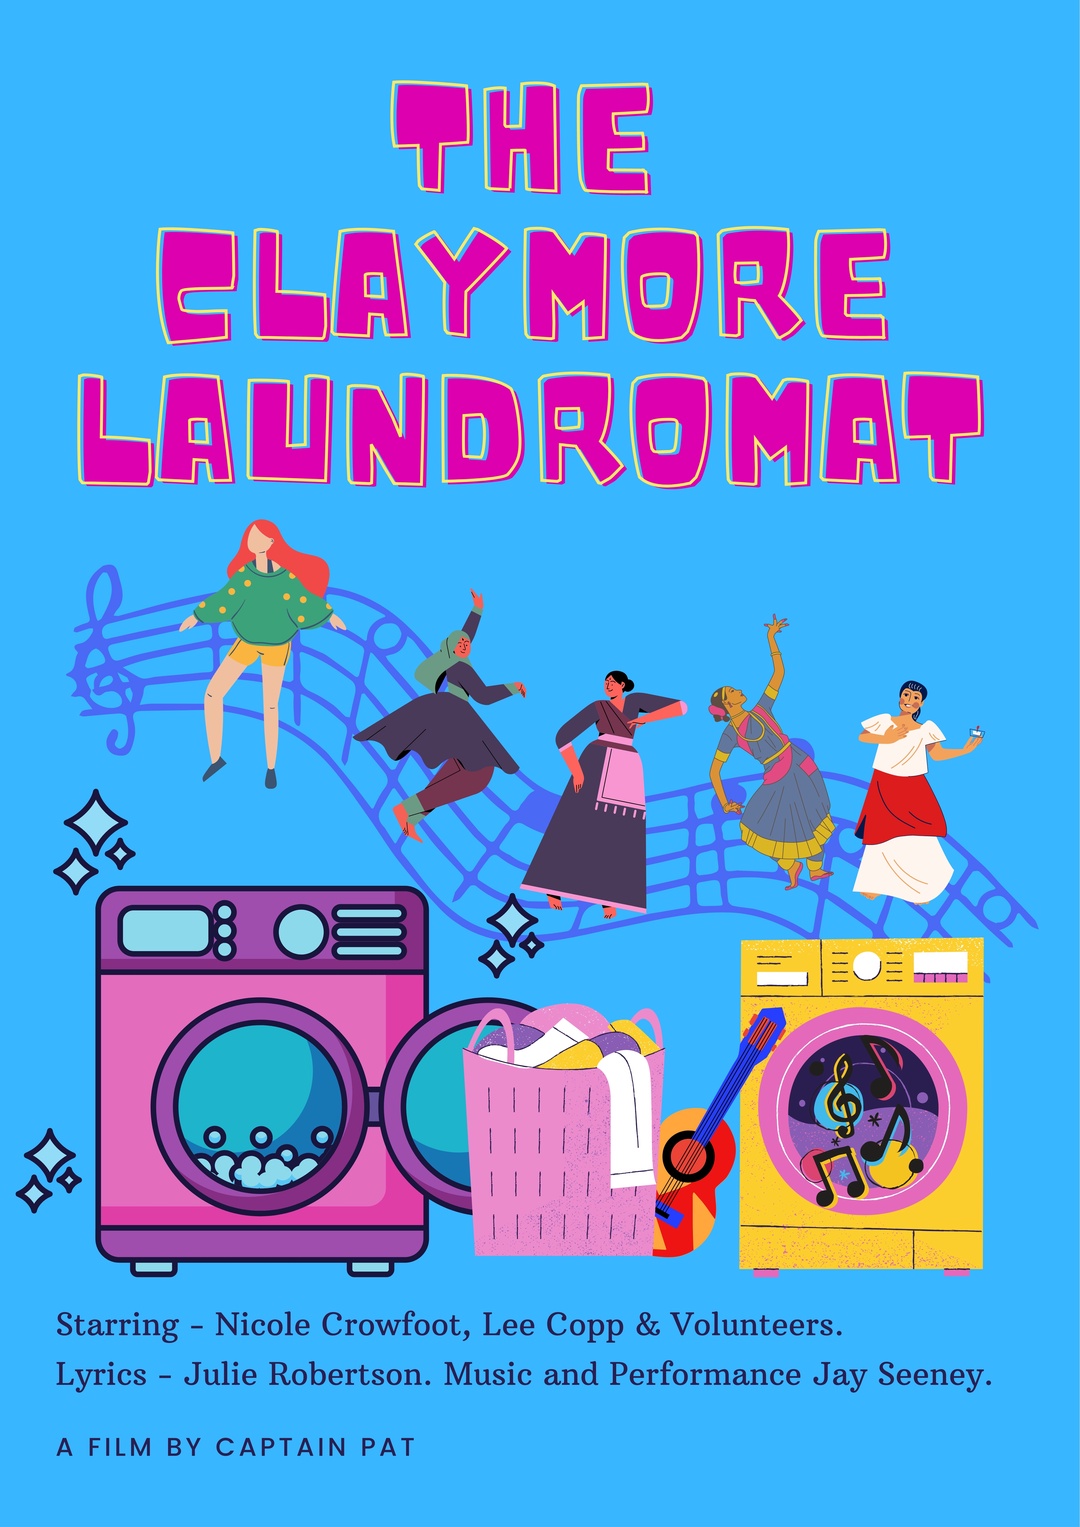 The Claymore Laundromat